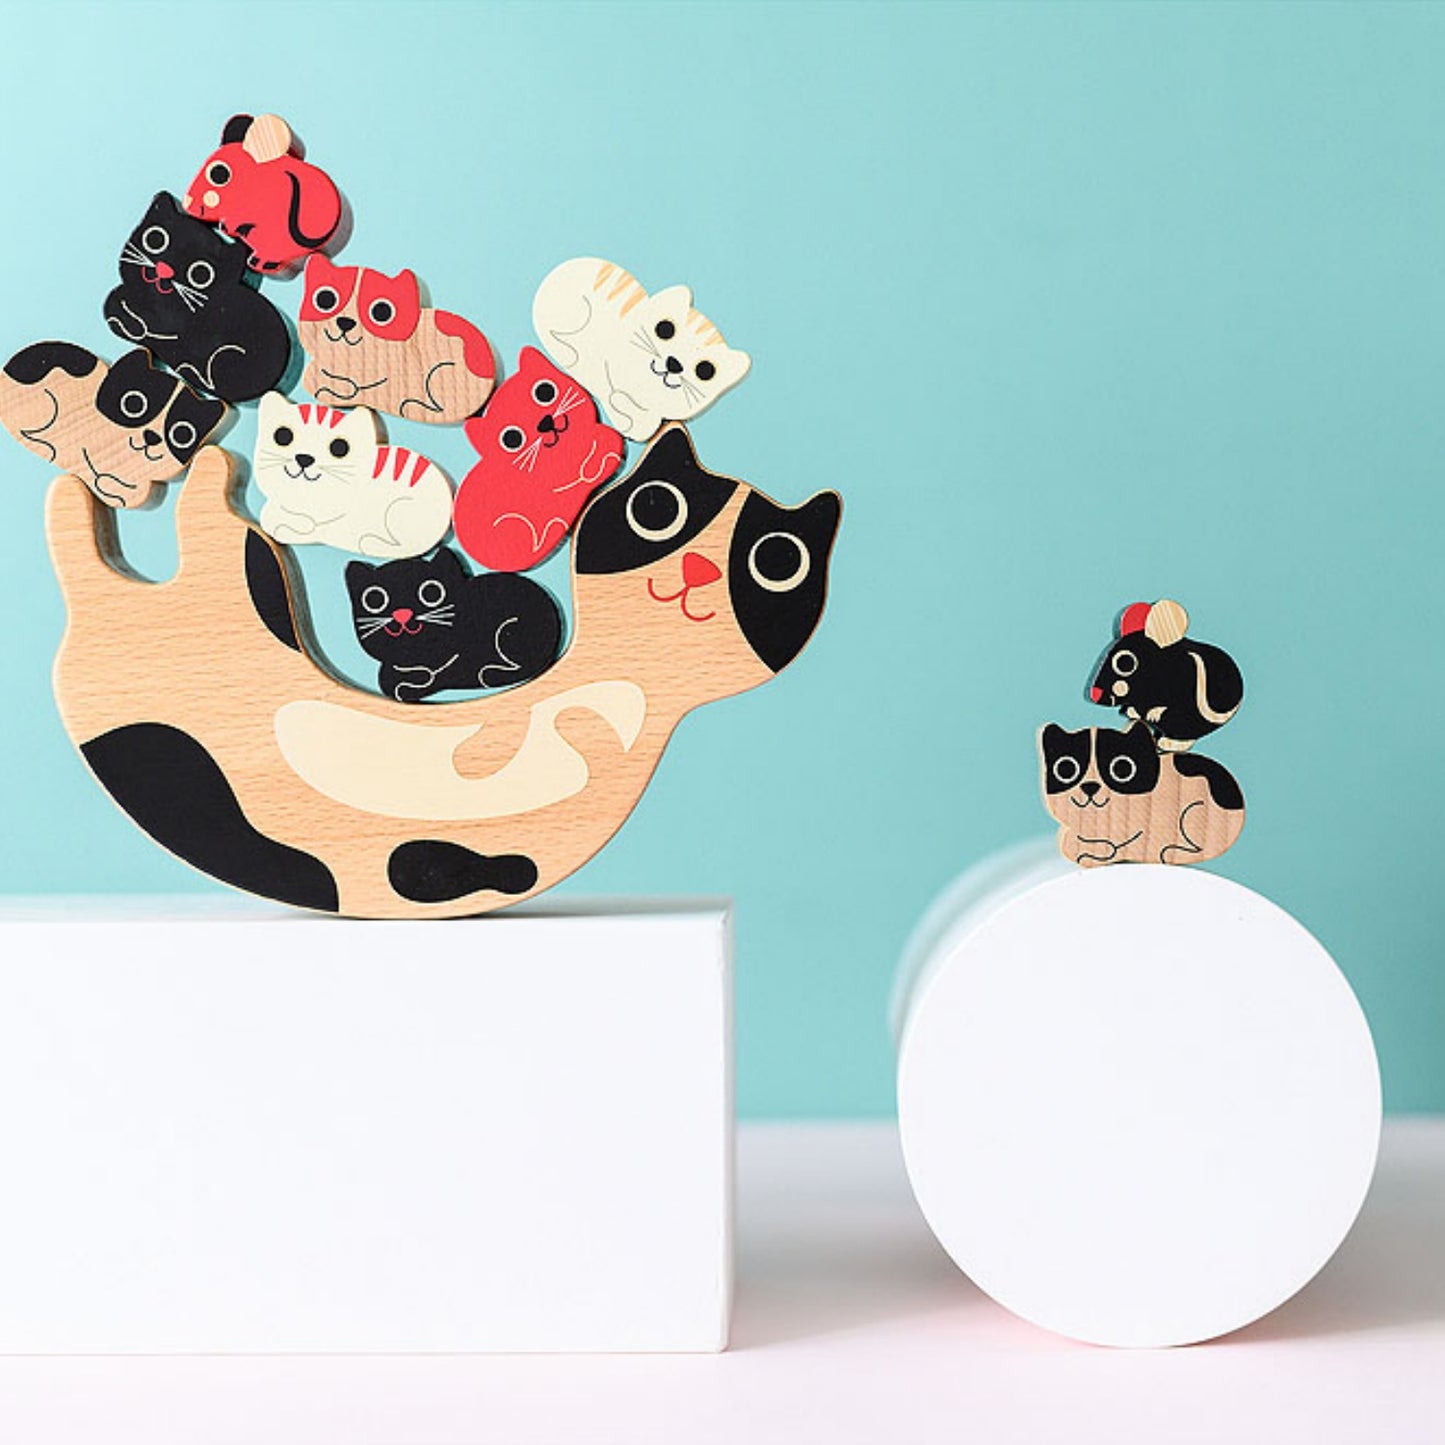 Vilac Catymini Balancing Game Designed by Ingela P. Arrhenius  | Hand-Crafted Wooden Toy | Wooden Stacking Balancing Game | Front View – Lifestyle – Some Kittens on Mother Cat, Mouse on One Kitten | BeoVERDE.ie